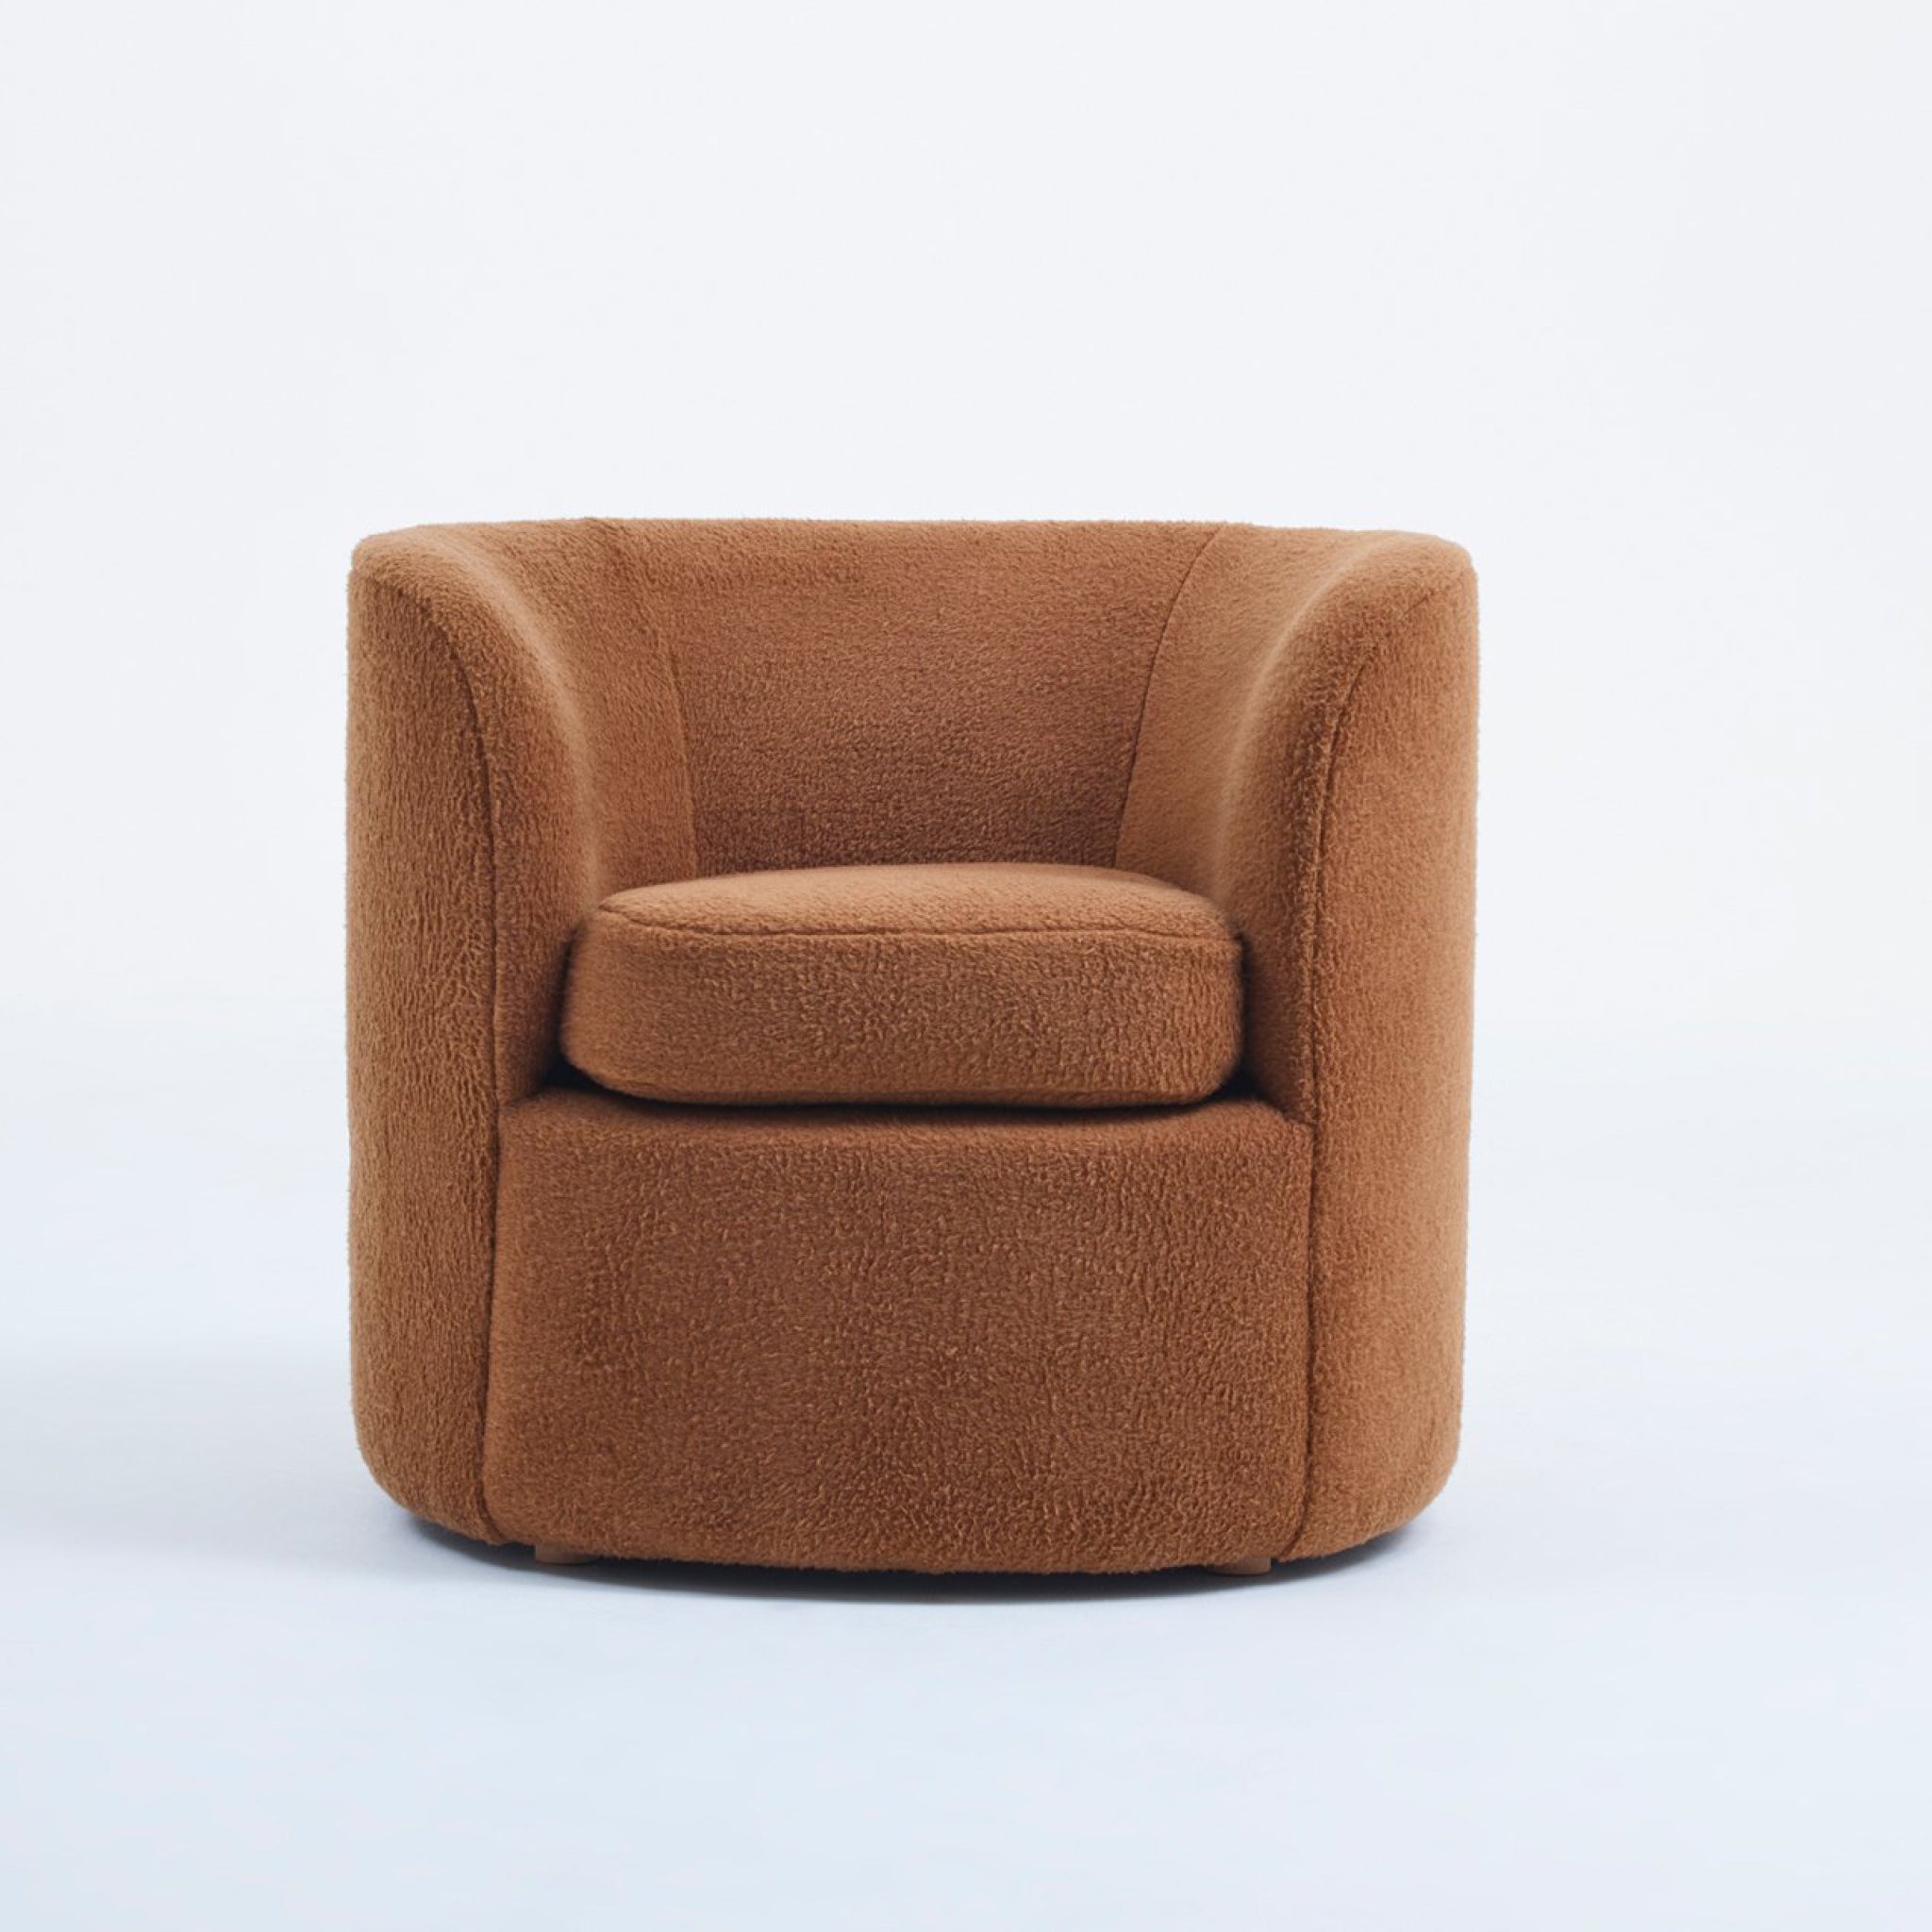 34 Comfy Chairs You'll Sink Right Into (2023)